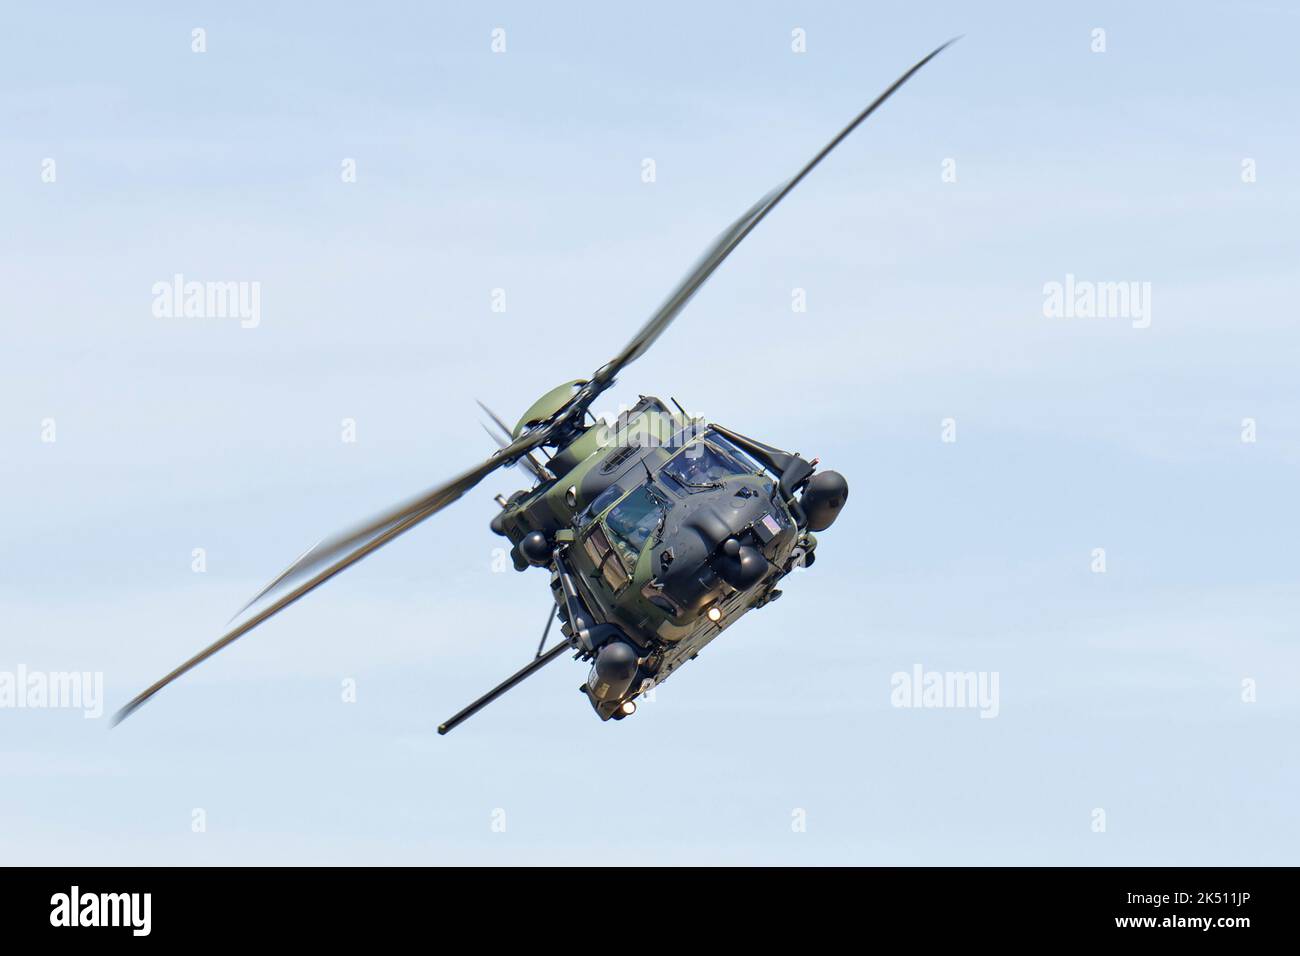 NH Industries NH90 Tactical Troop Transport Helicopter dell'Esercito Tedesco mette in mostra un impressionante volo al Royal International Air Tattoo Foto Stock